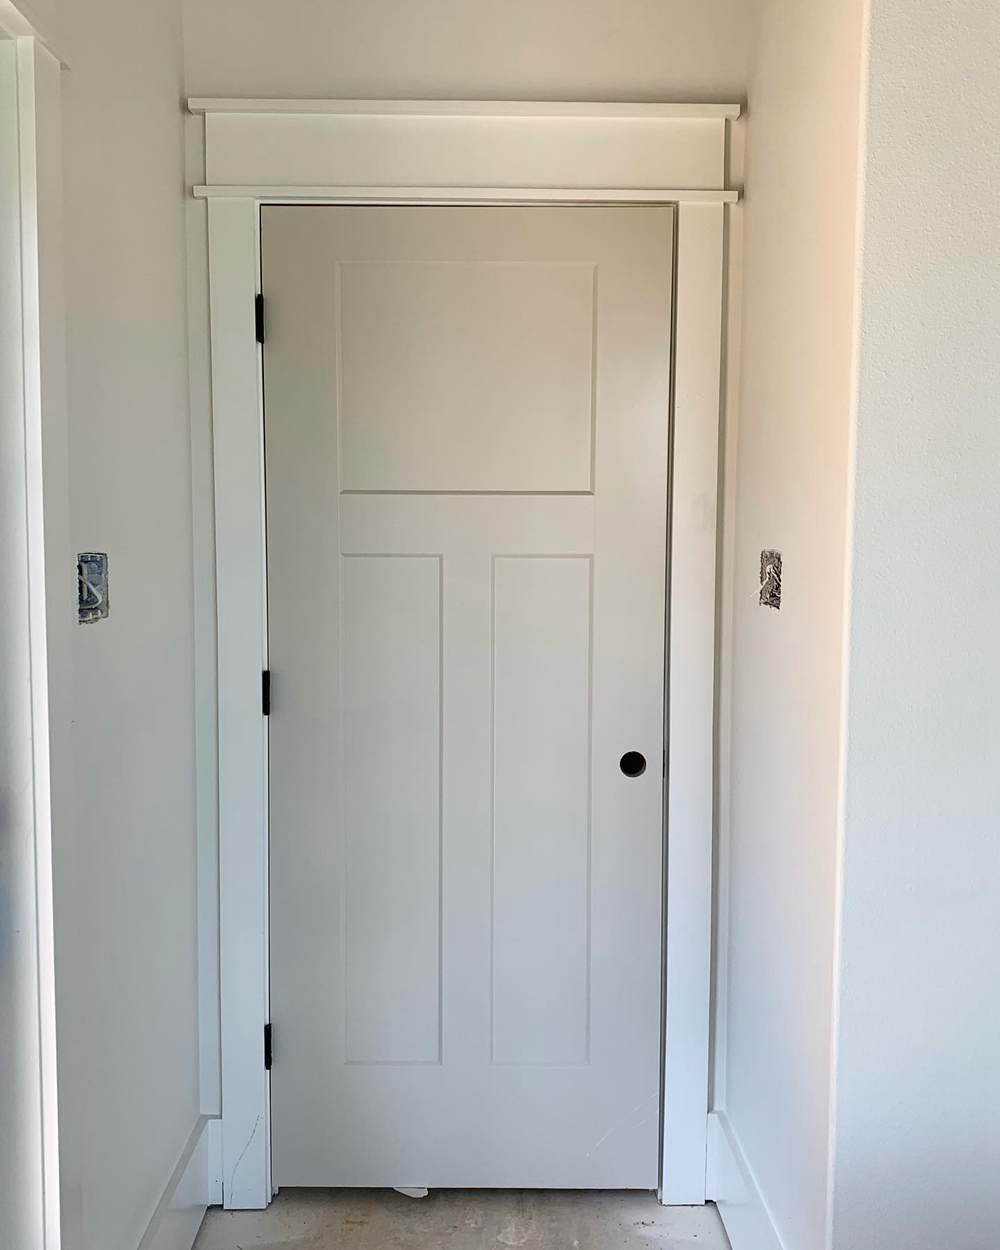 Sherwin Williams Agreeable Gray on Door